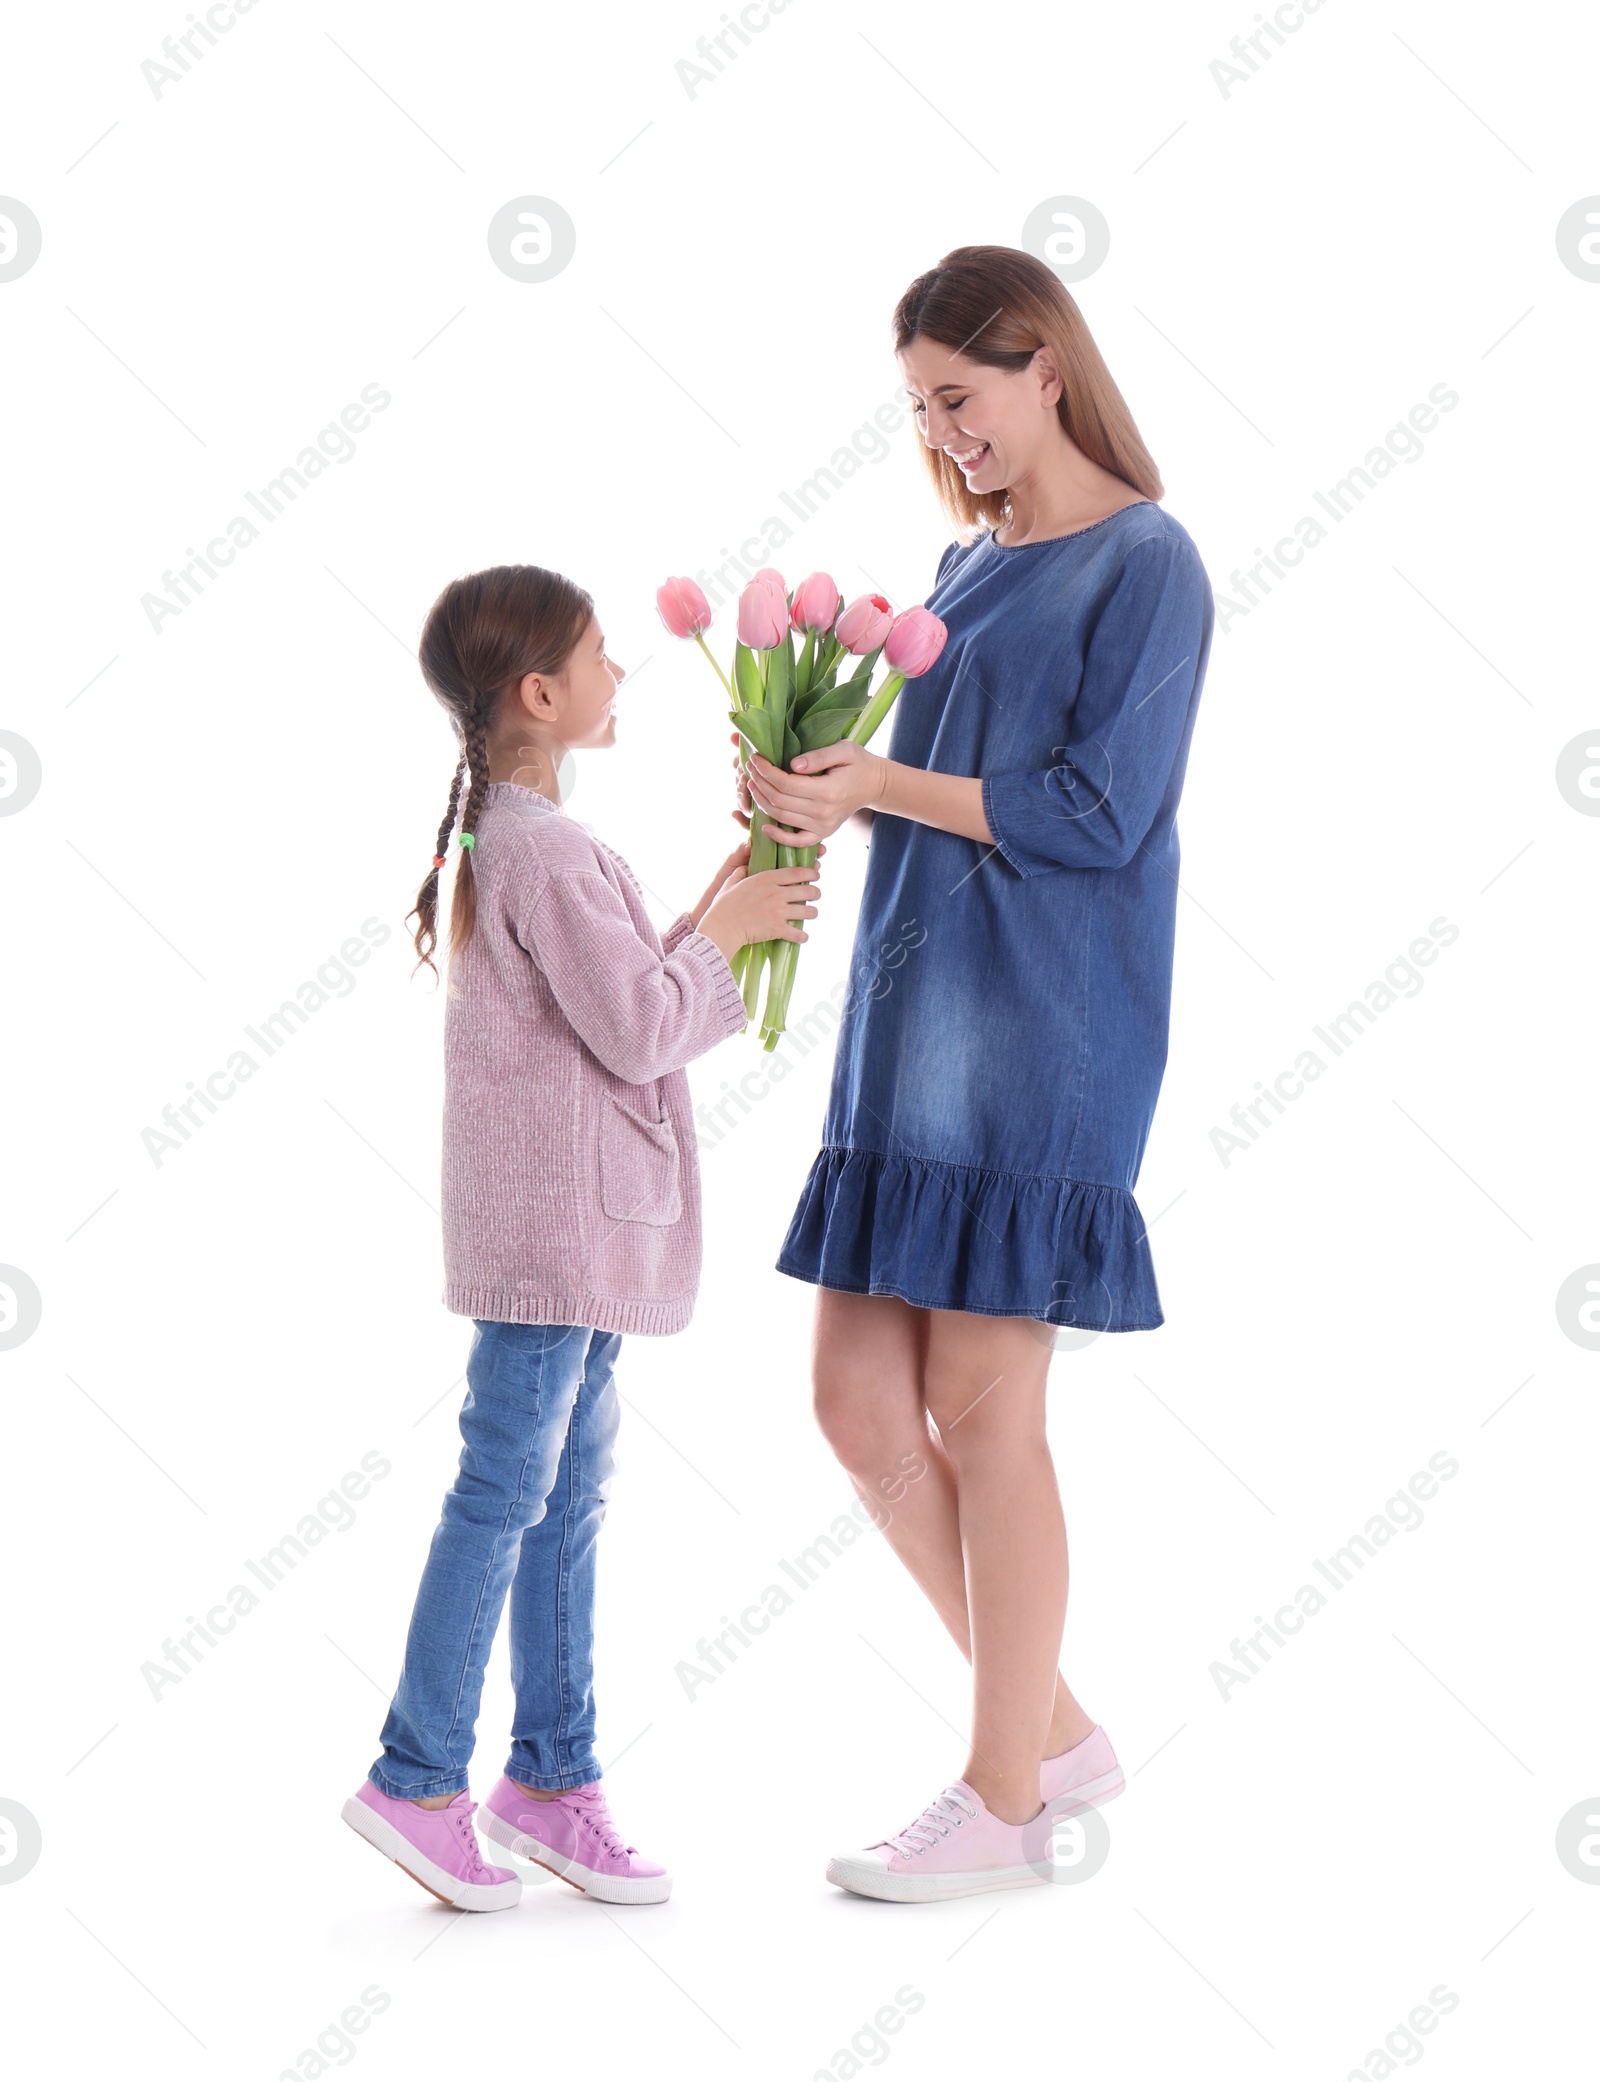 Photo of Happy mother and daughter with flowers on white background. International Women's Day